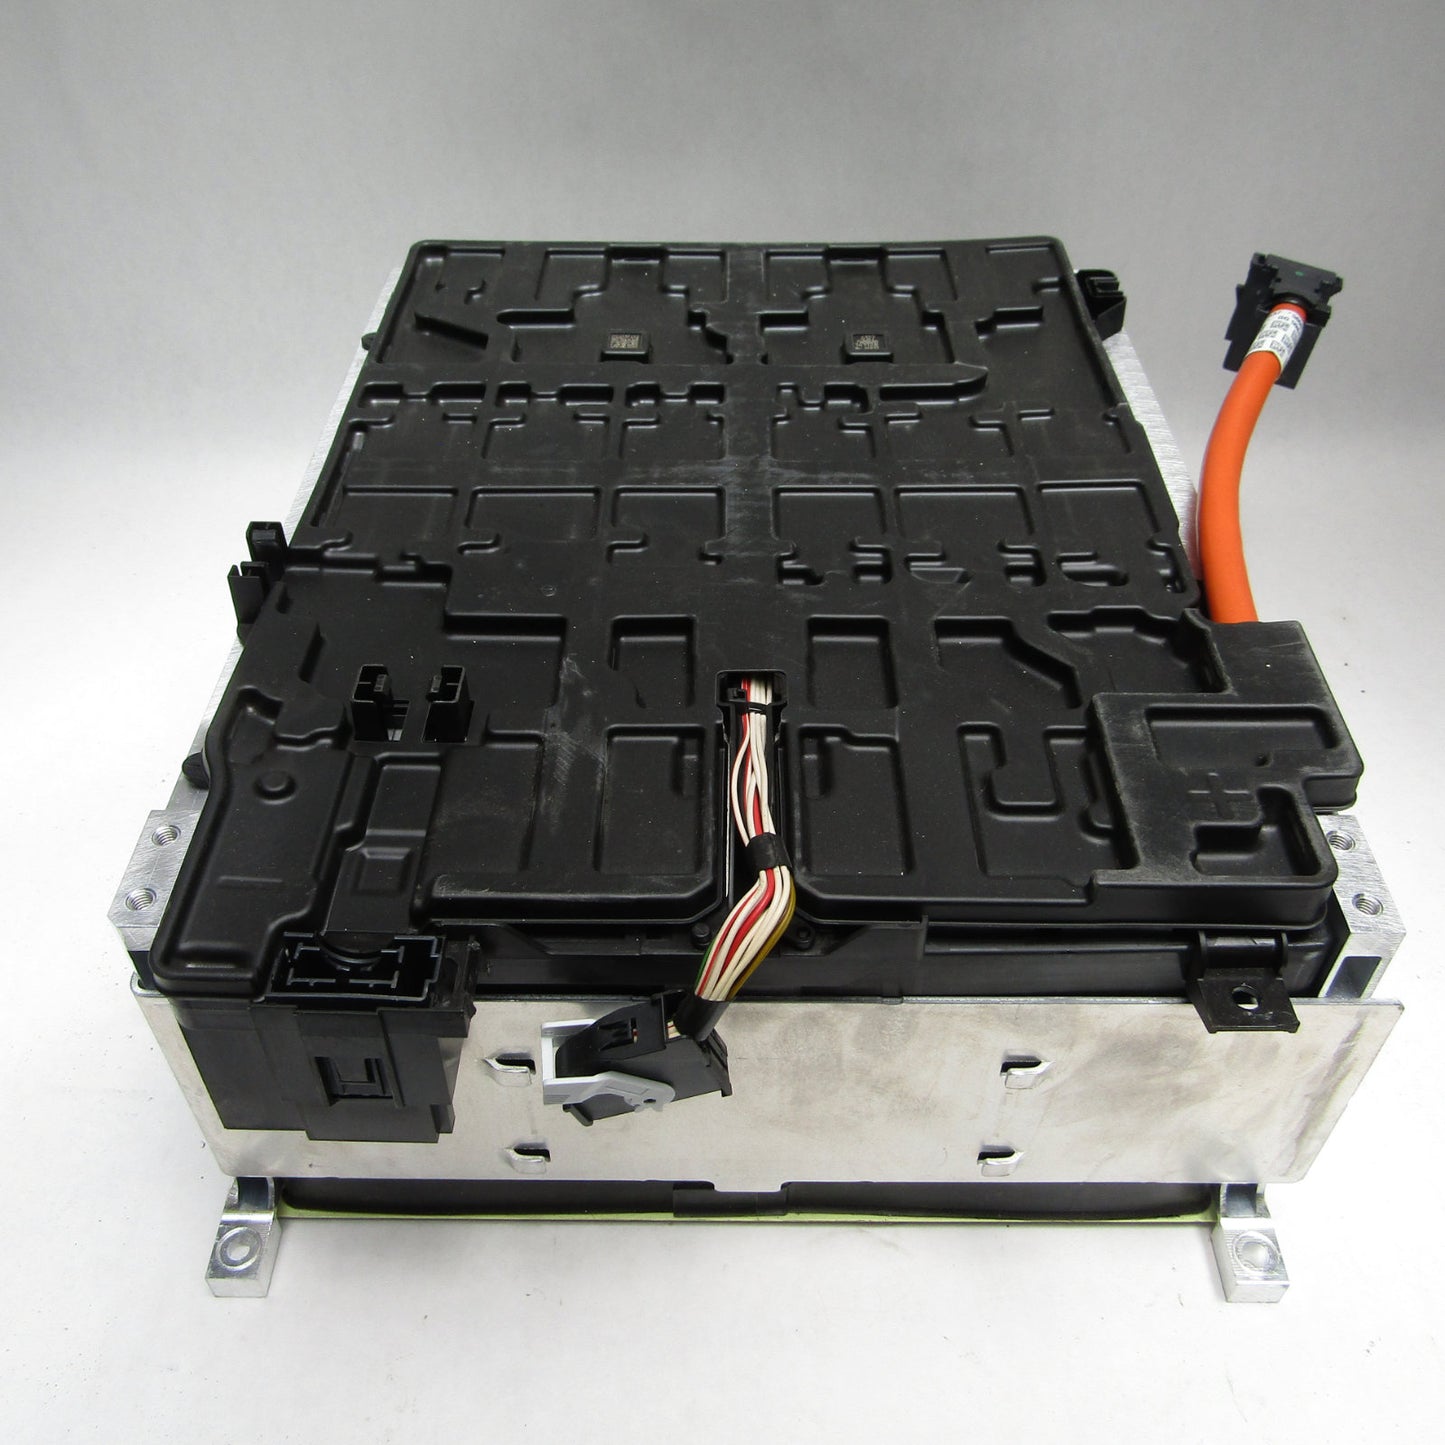 BMW i3 / 2.7 kWh / Battery Modules (order of 10)